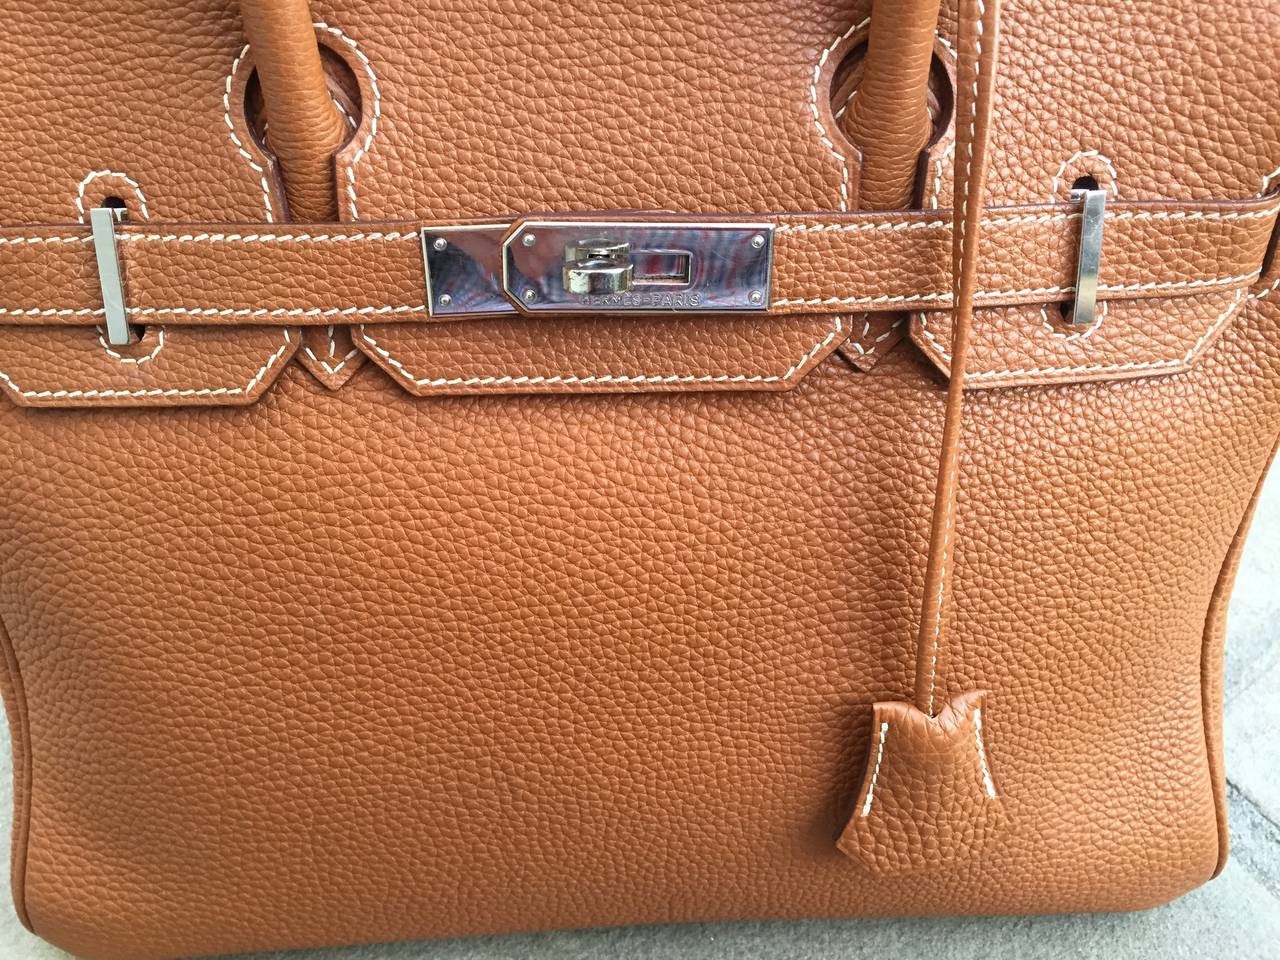 Wonderful small Birkin from Hermes.
Brown with Palladium hardware
30 cm, the perfect size.
There is no lock, just the key.
Minor surface wear at corners  and on hardware
From 2003, it is stamped with a  G in a square.